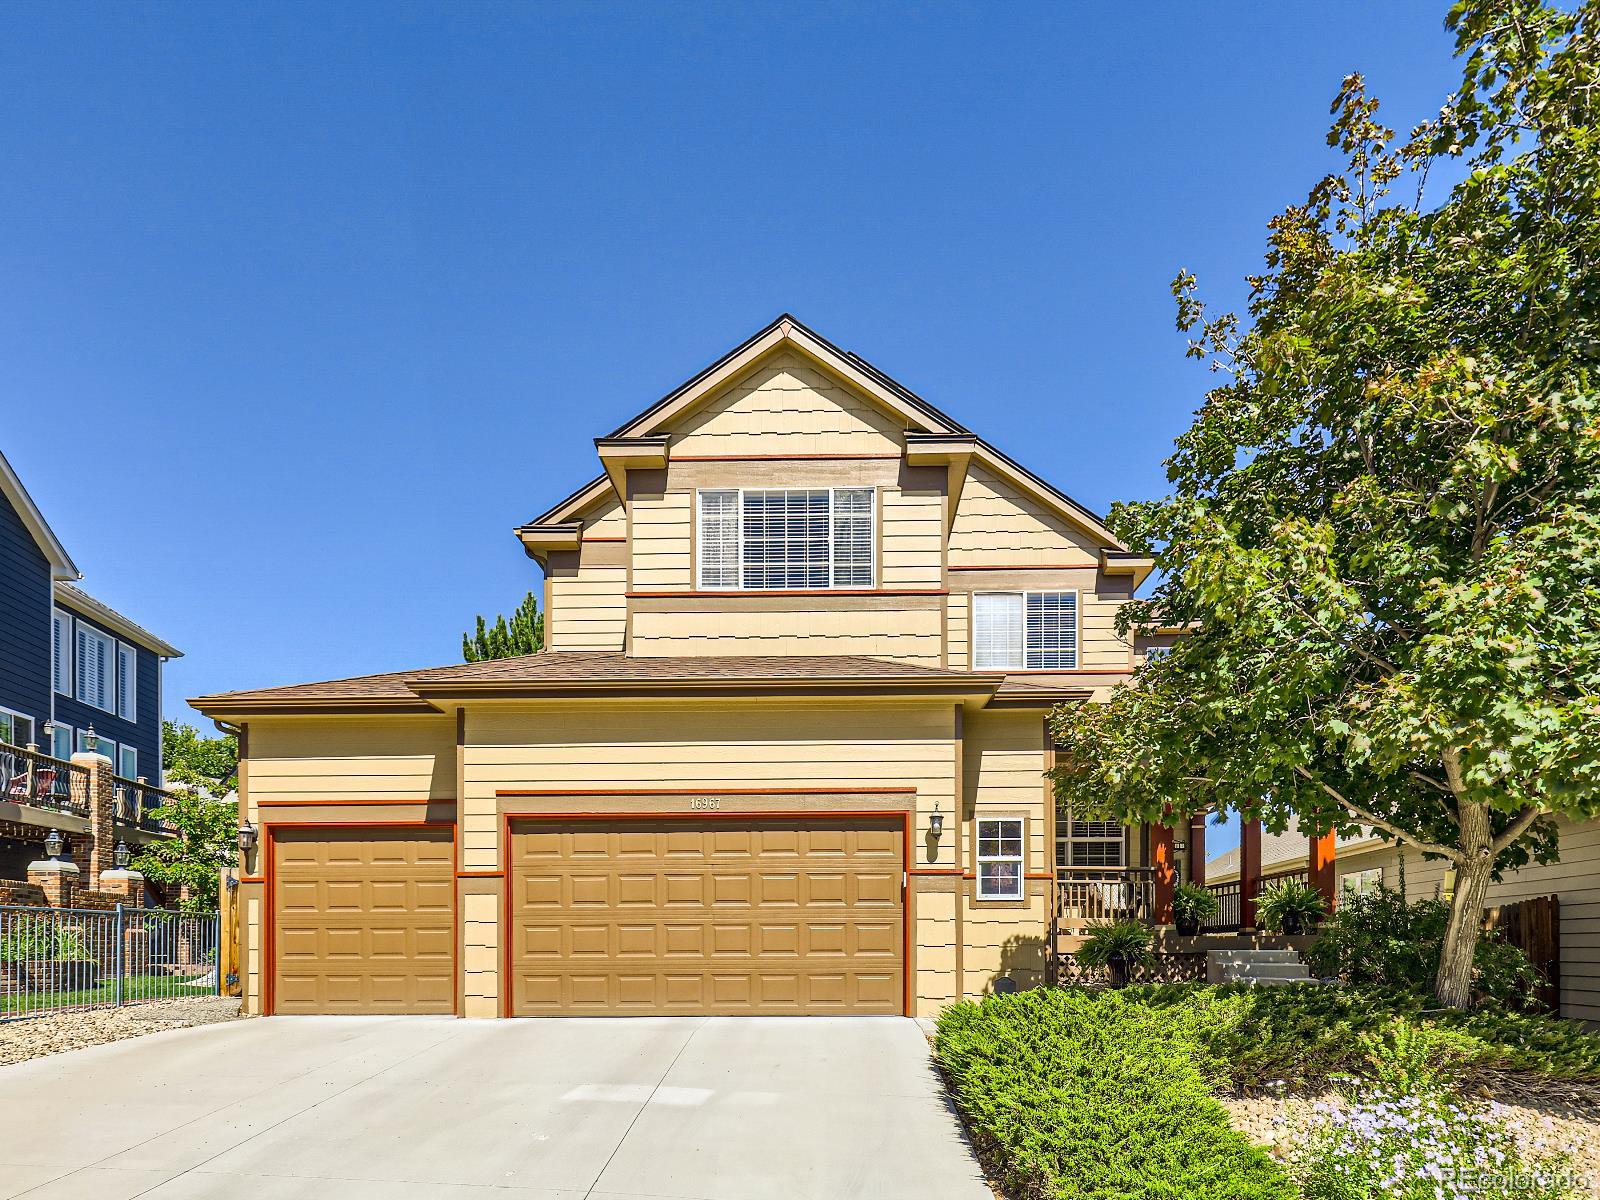 16967 W 71st Place, arvada MLS: 5087523 Beds: 5 Baths: 4 Price: $1,125,000